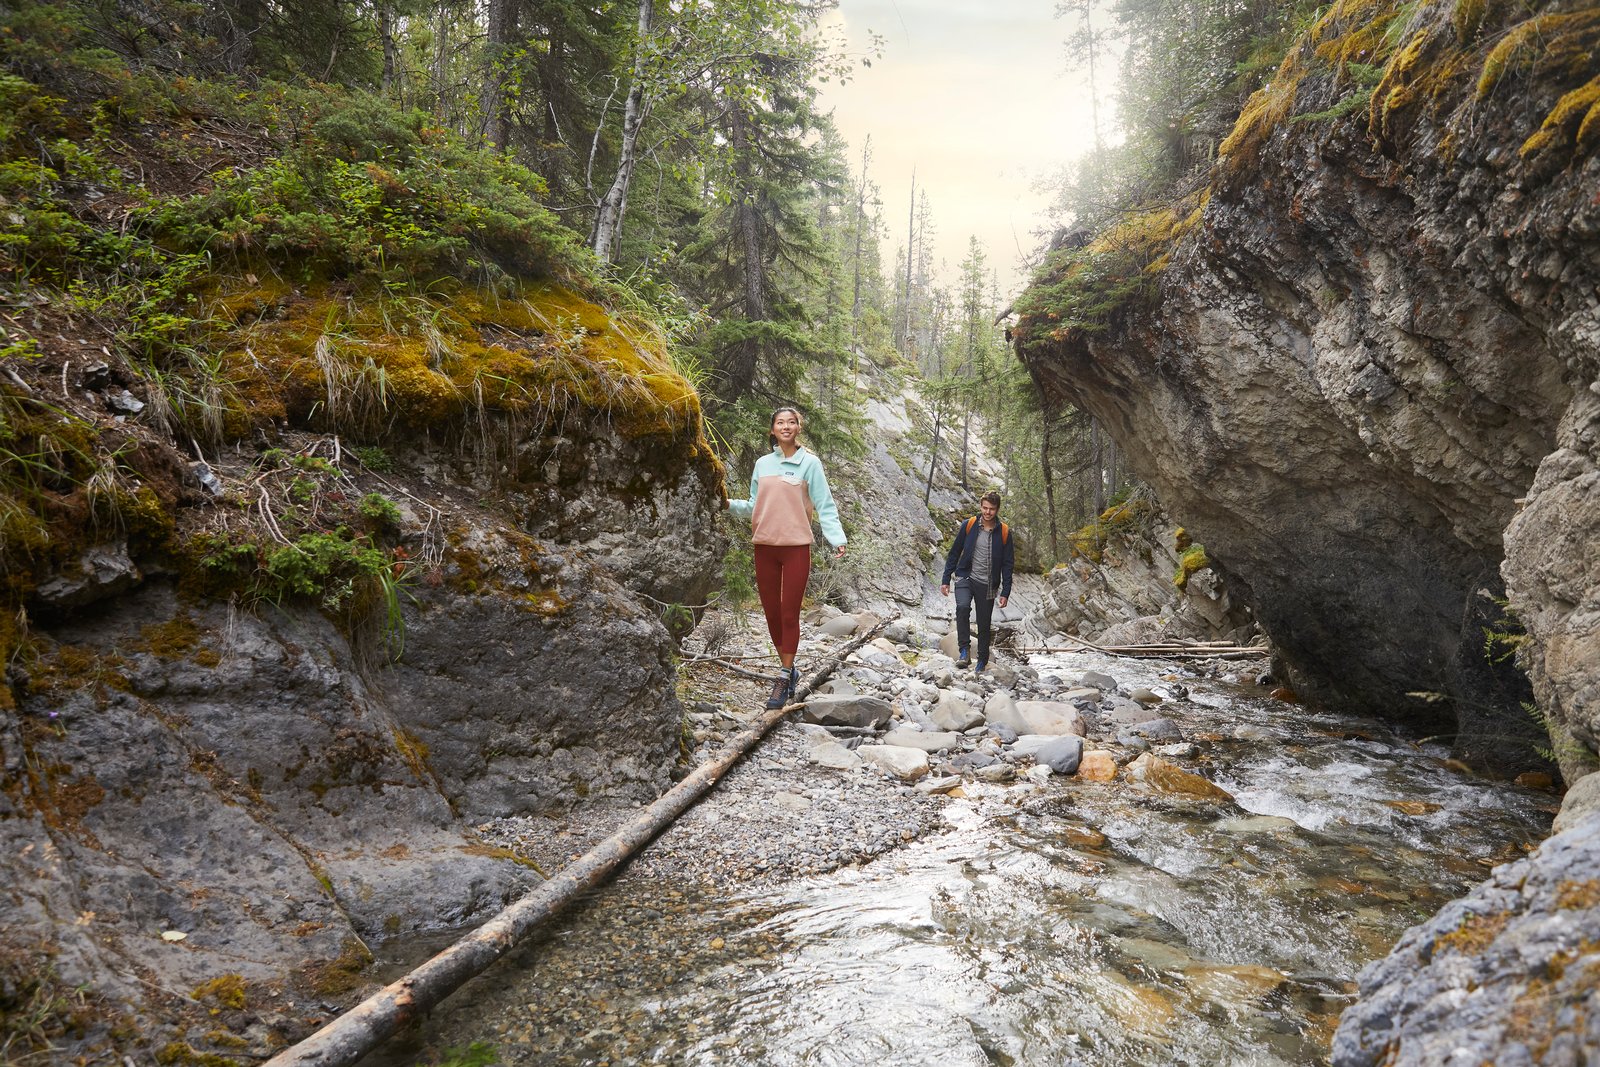 A woman balancing on a fallen down tree trunk with a man behind her standing on rocks as they are on a hike together admiring Whitegoat Falls in Nordegg.